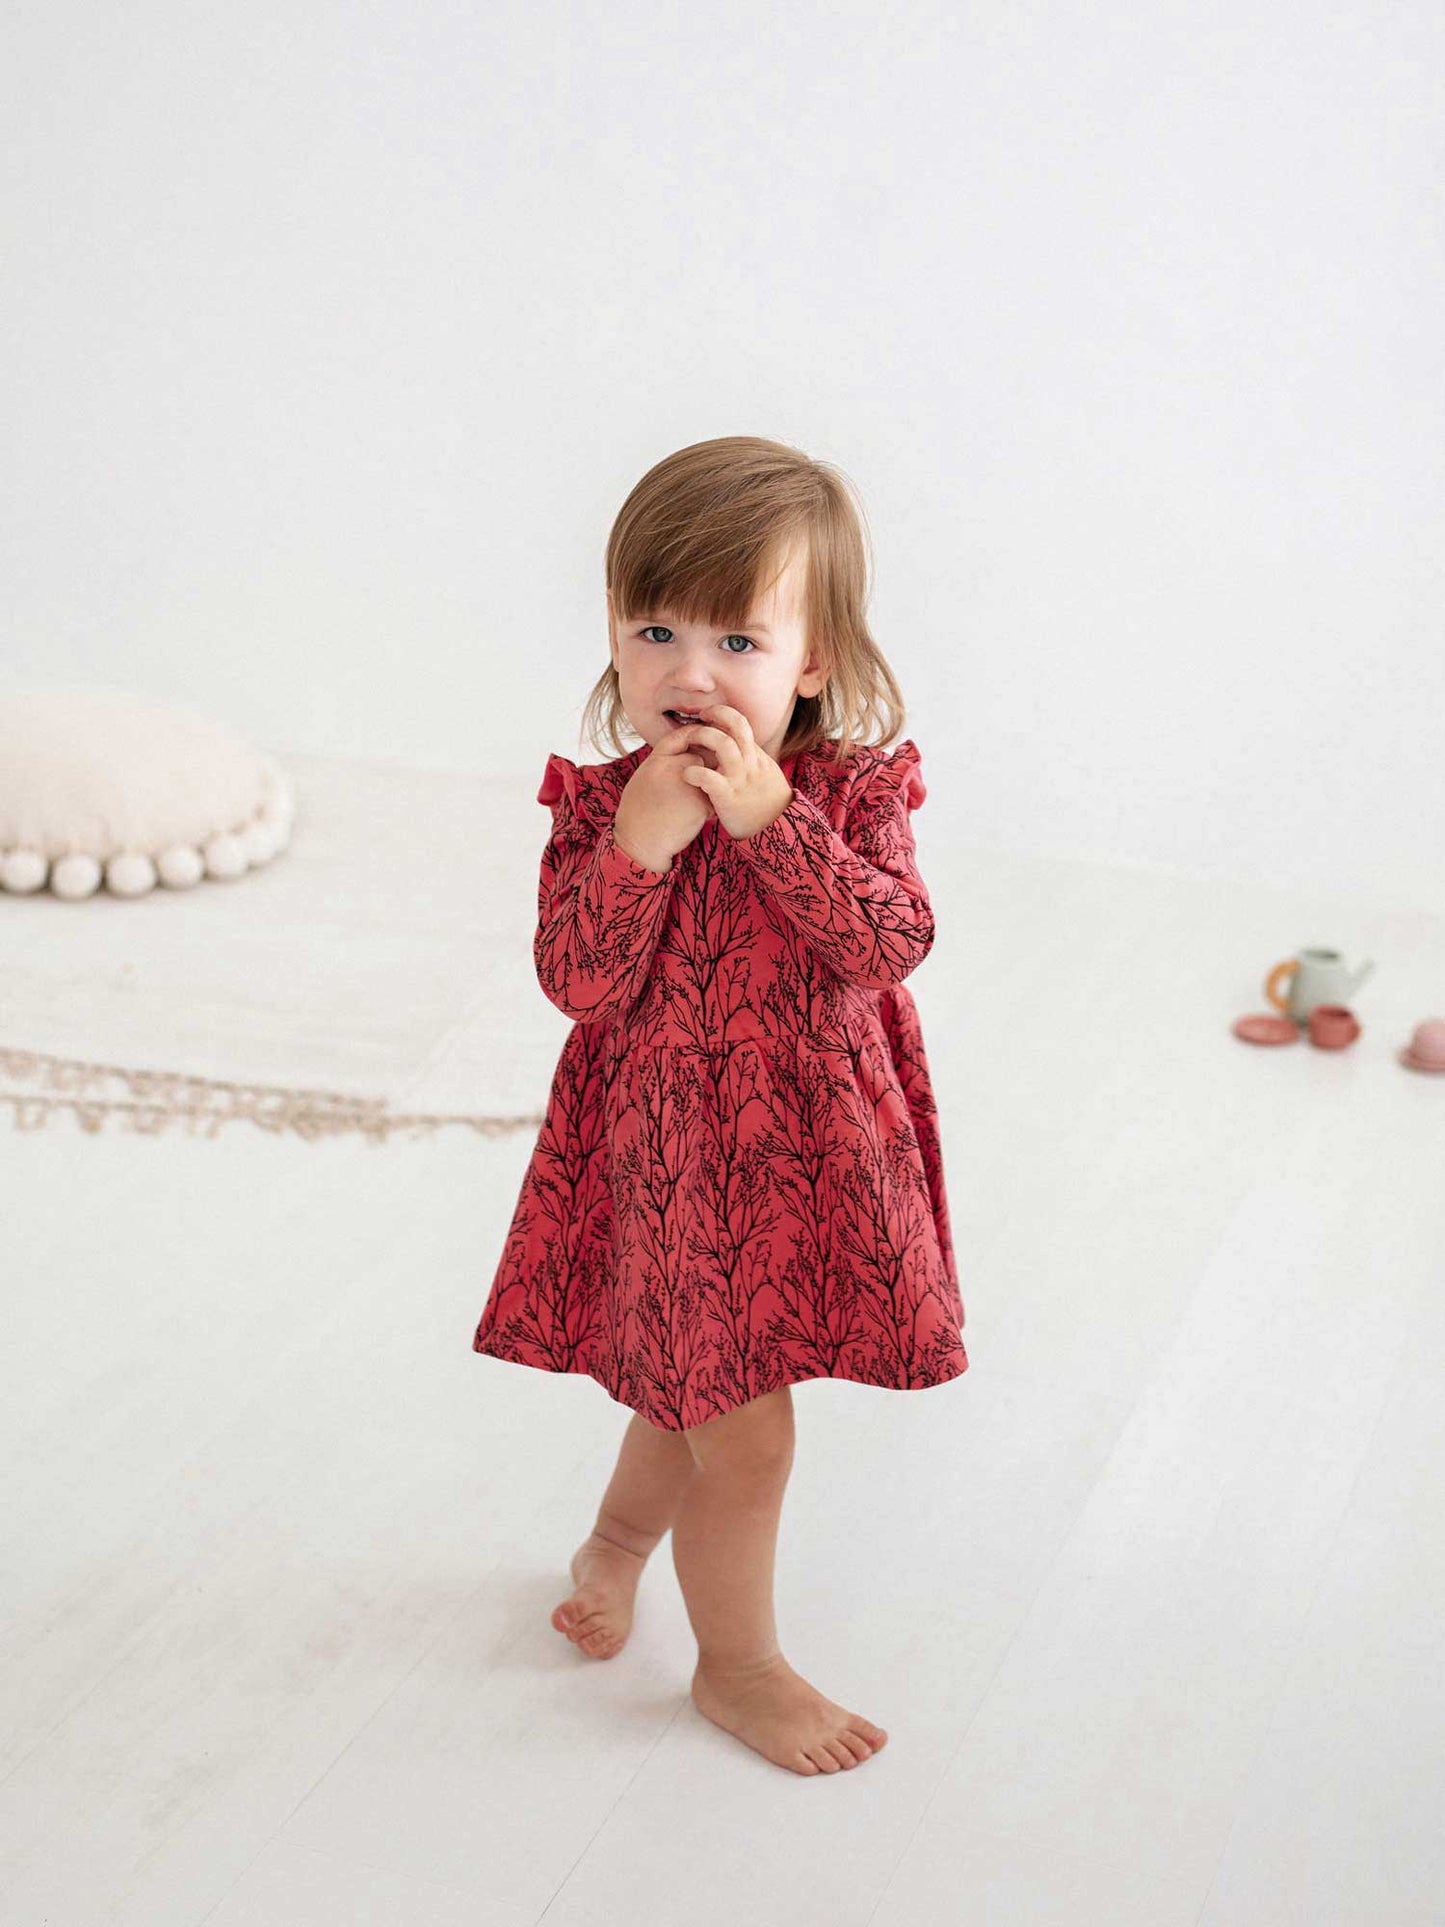 The lovely squirrel pattern adds a touch of sweetness for a look you won't be able to resist. This chic dress is made from high-quality soft stockinet and is sure to provide all the warmth and comfort your baby needs.